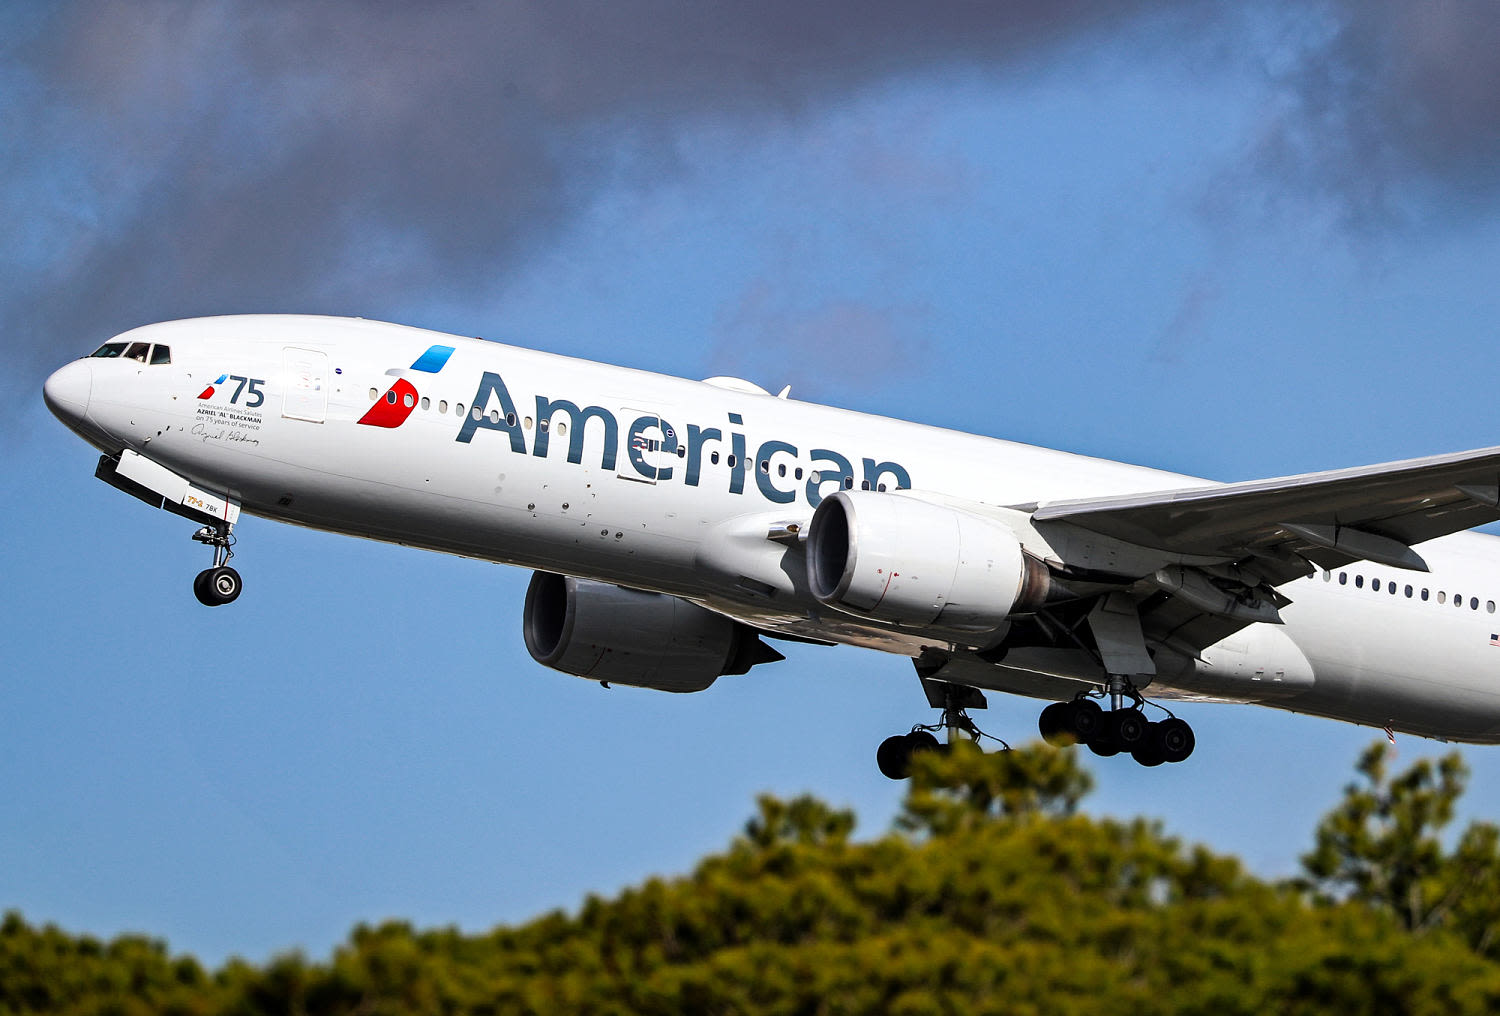 Three Black men sue American Airlines for racial discrimination after allegedly being pulled off plane over body odor complaint